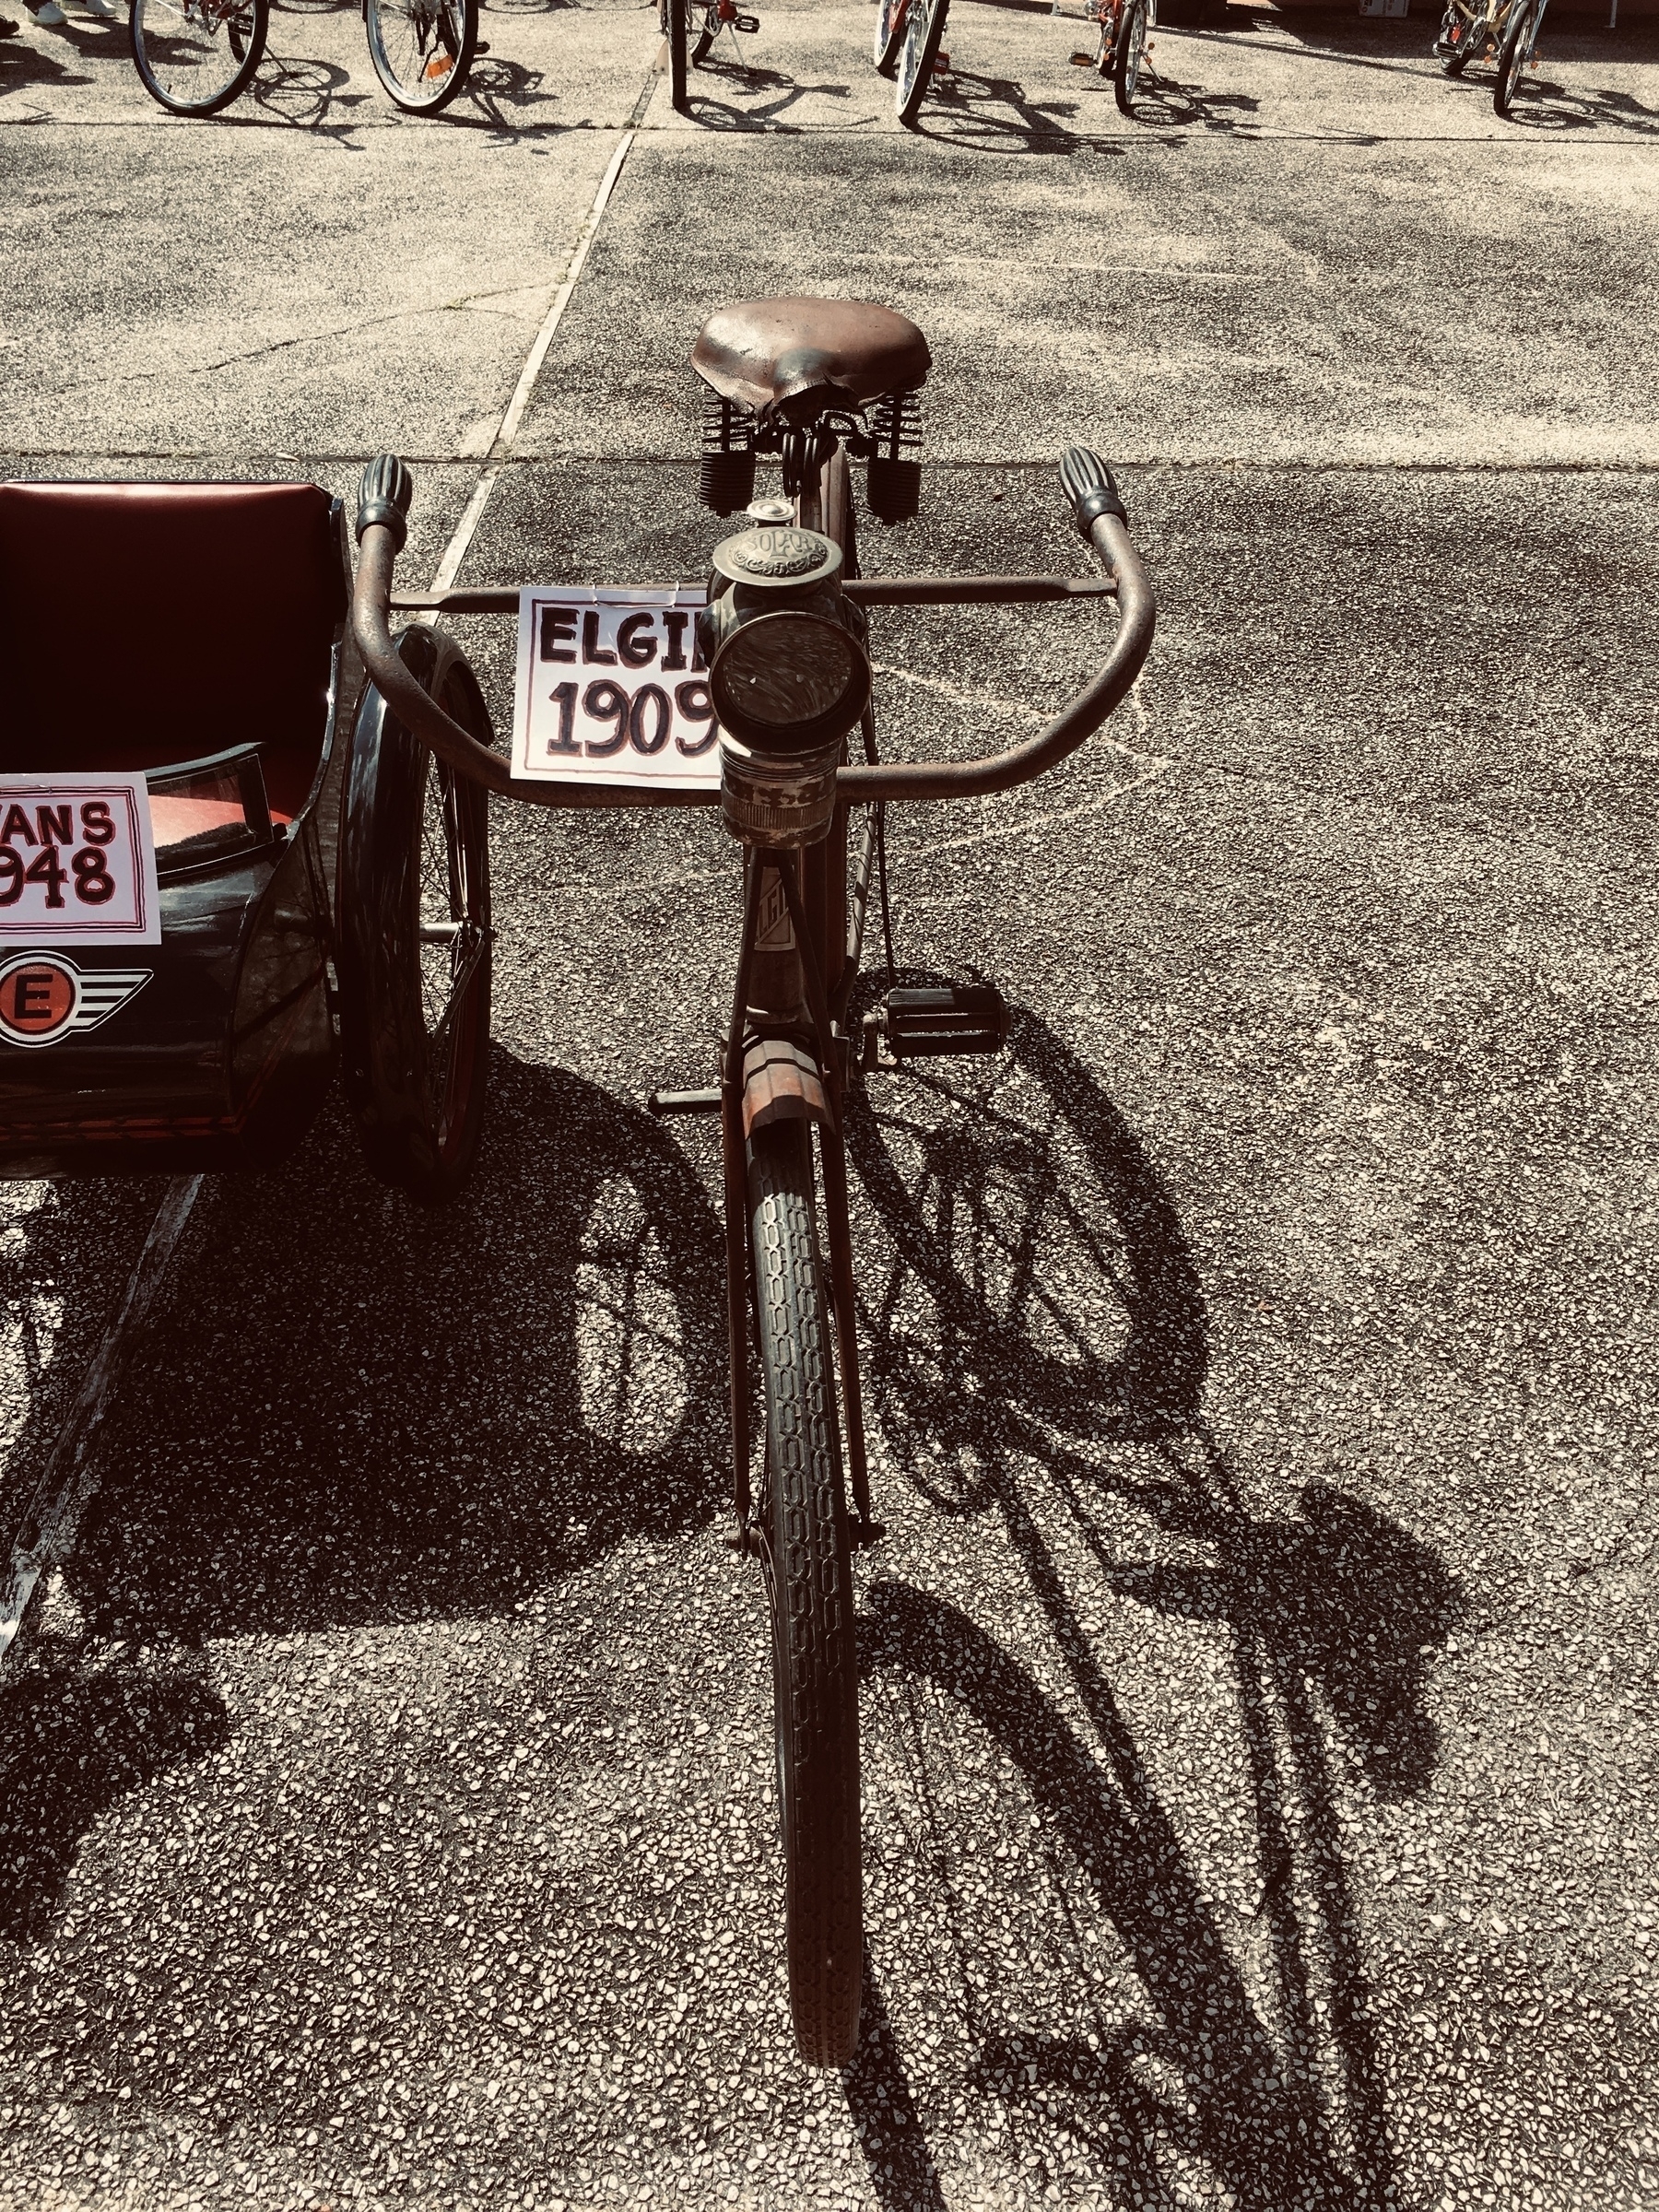 An old bike with a handwritten label “Elgin 1909” next to a small wagon